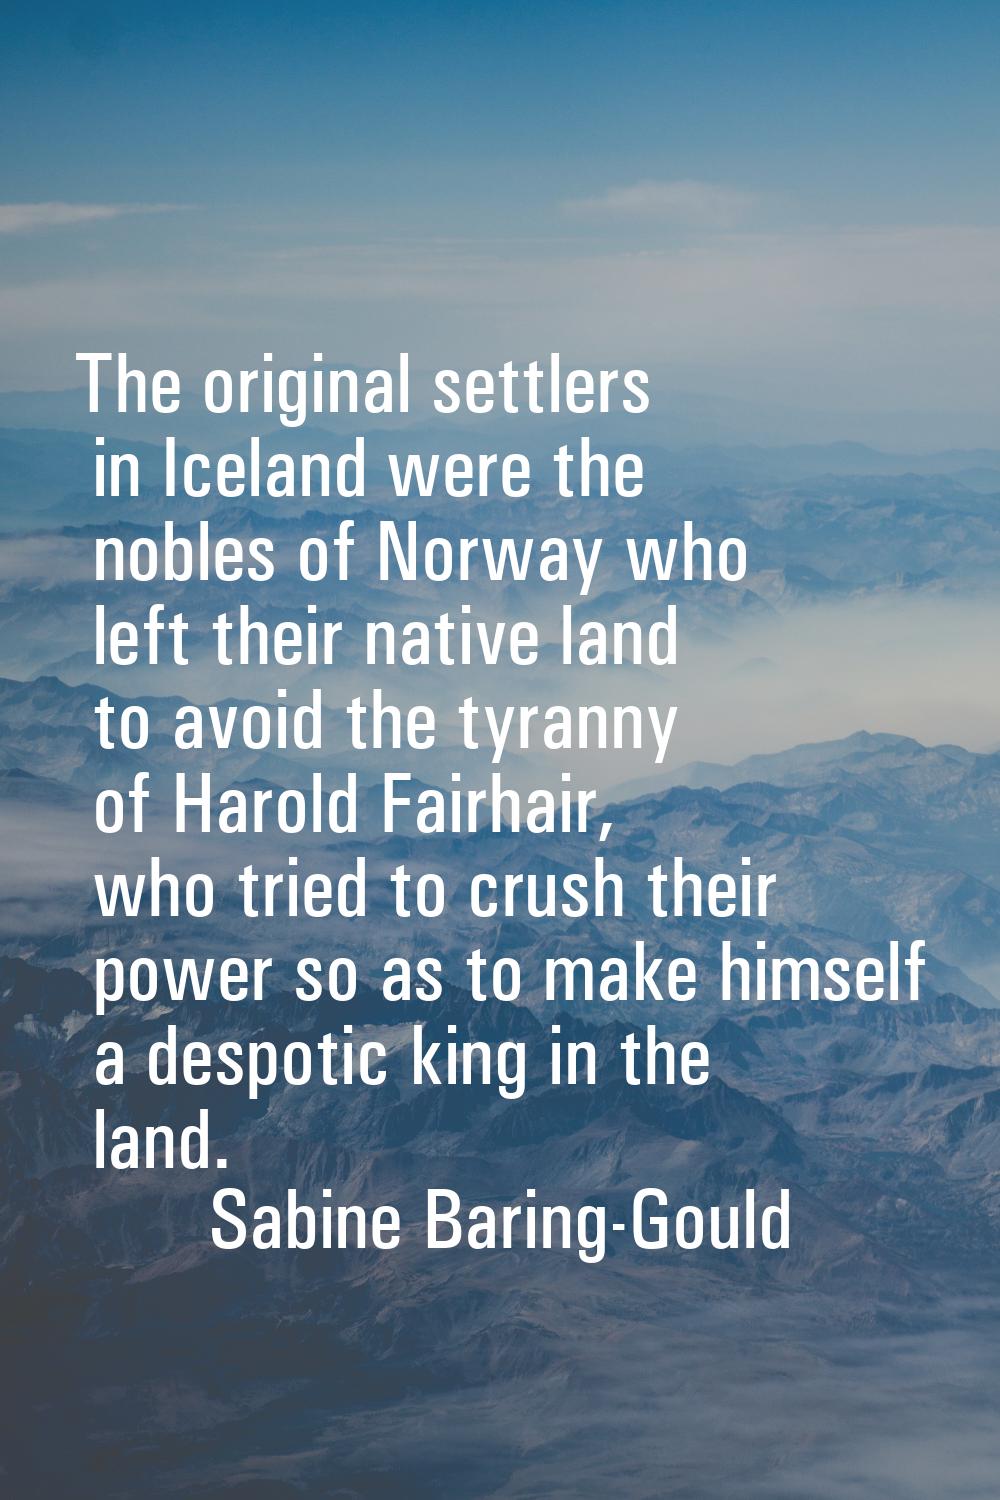 The original settlers in Iceland were the nobles of Norway who left their native land to avoid the 